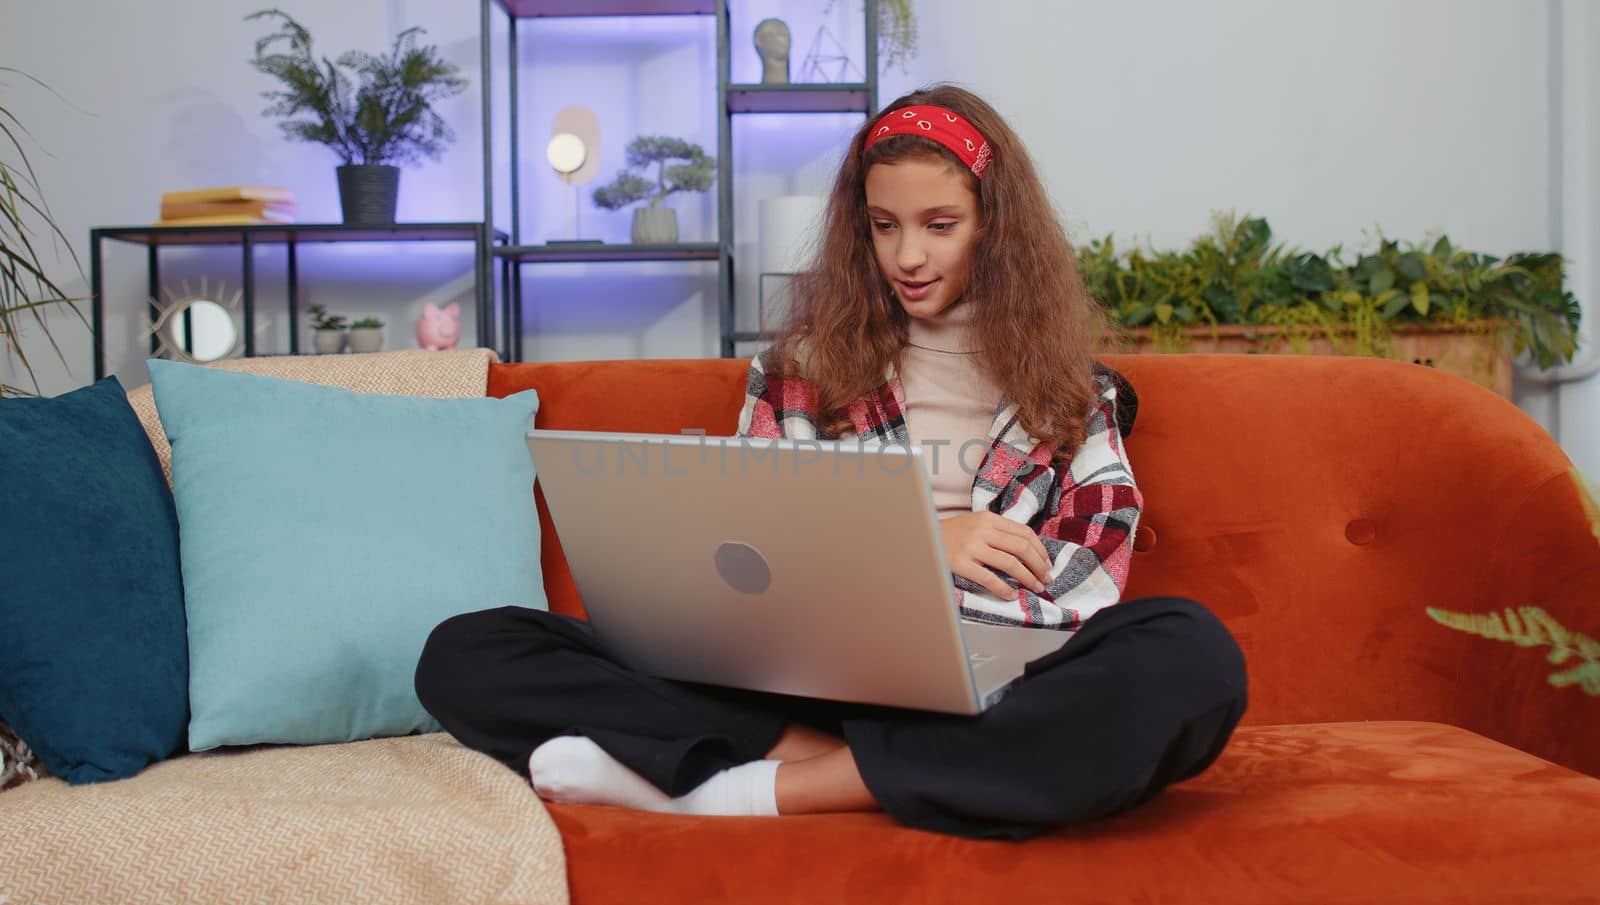 Girl sitting on home couch, looking at camera, making video conference call with friends or family by efuror